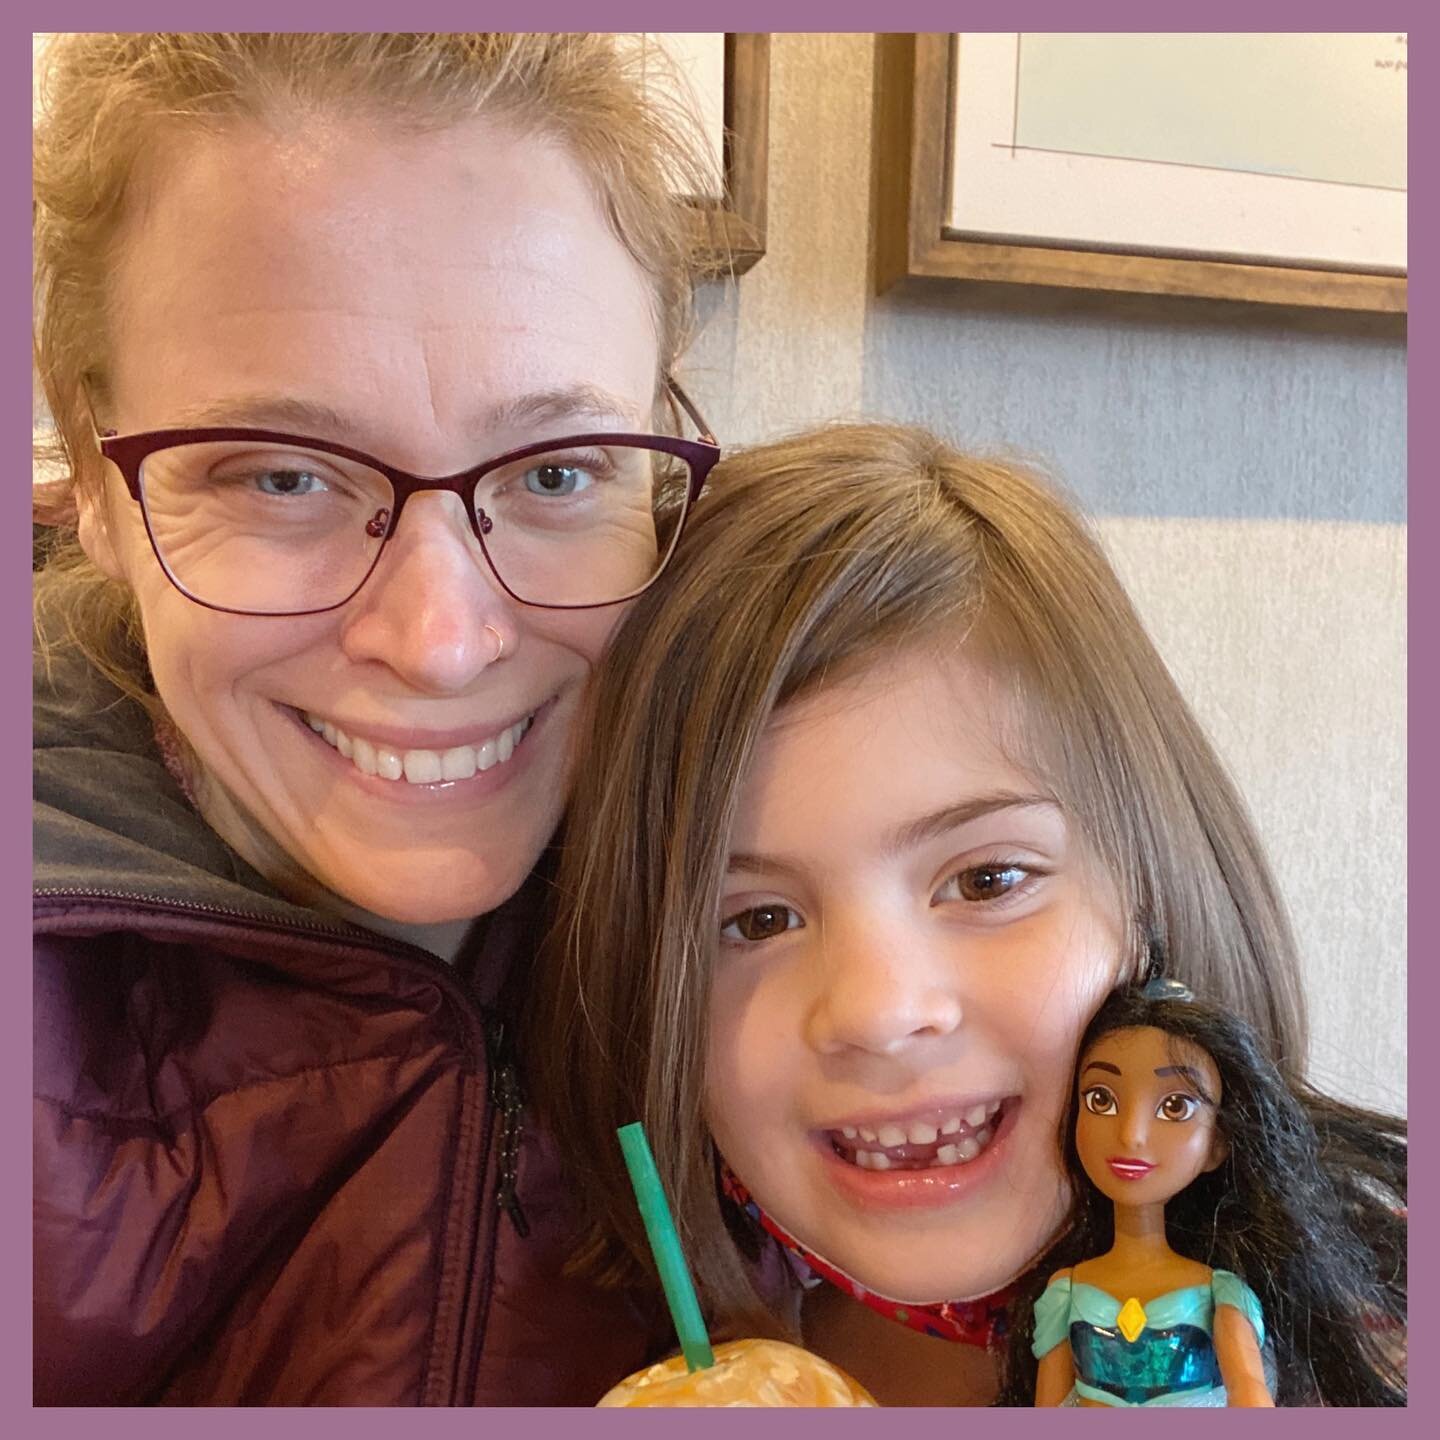 Owning my own practice means I can have a coffee date with my favorite toothless wonder at 3:30 on a Monday, after volunteering at her class Valentine&rsquo;s party.

It also means that after she went to bed, I wrote session notes and answered emails